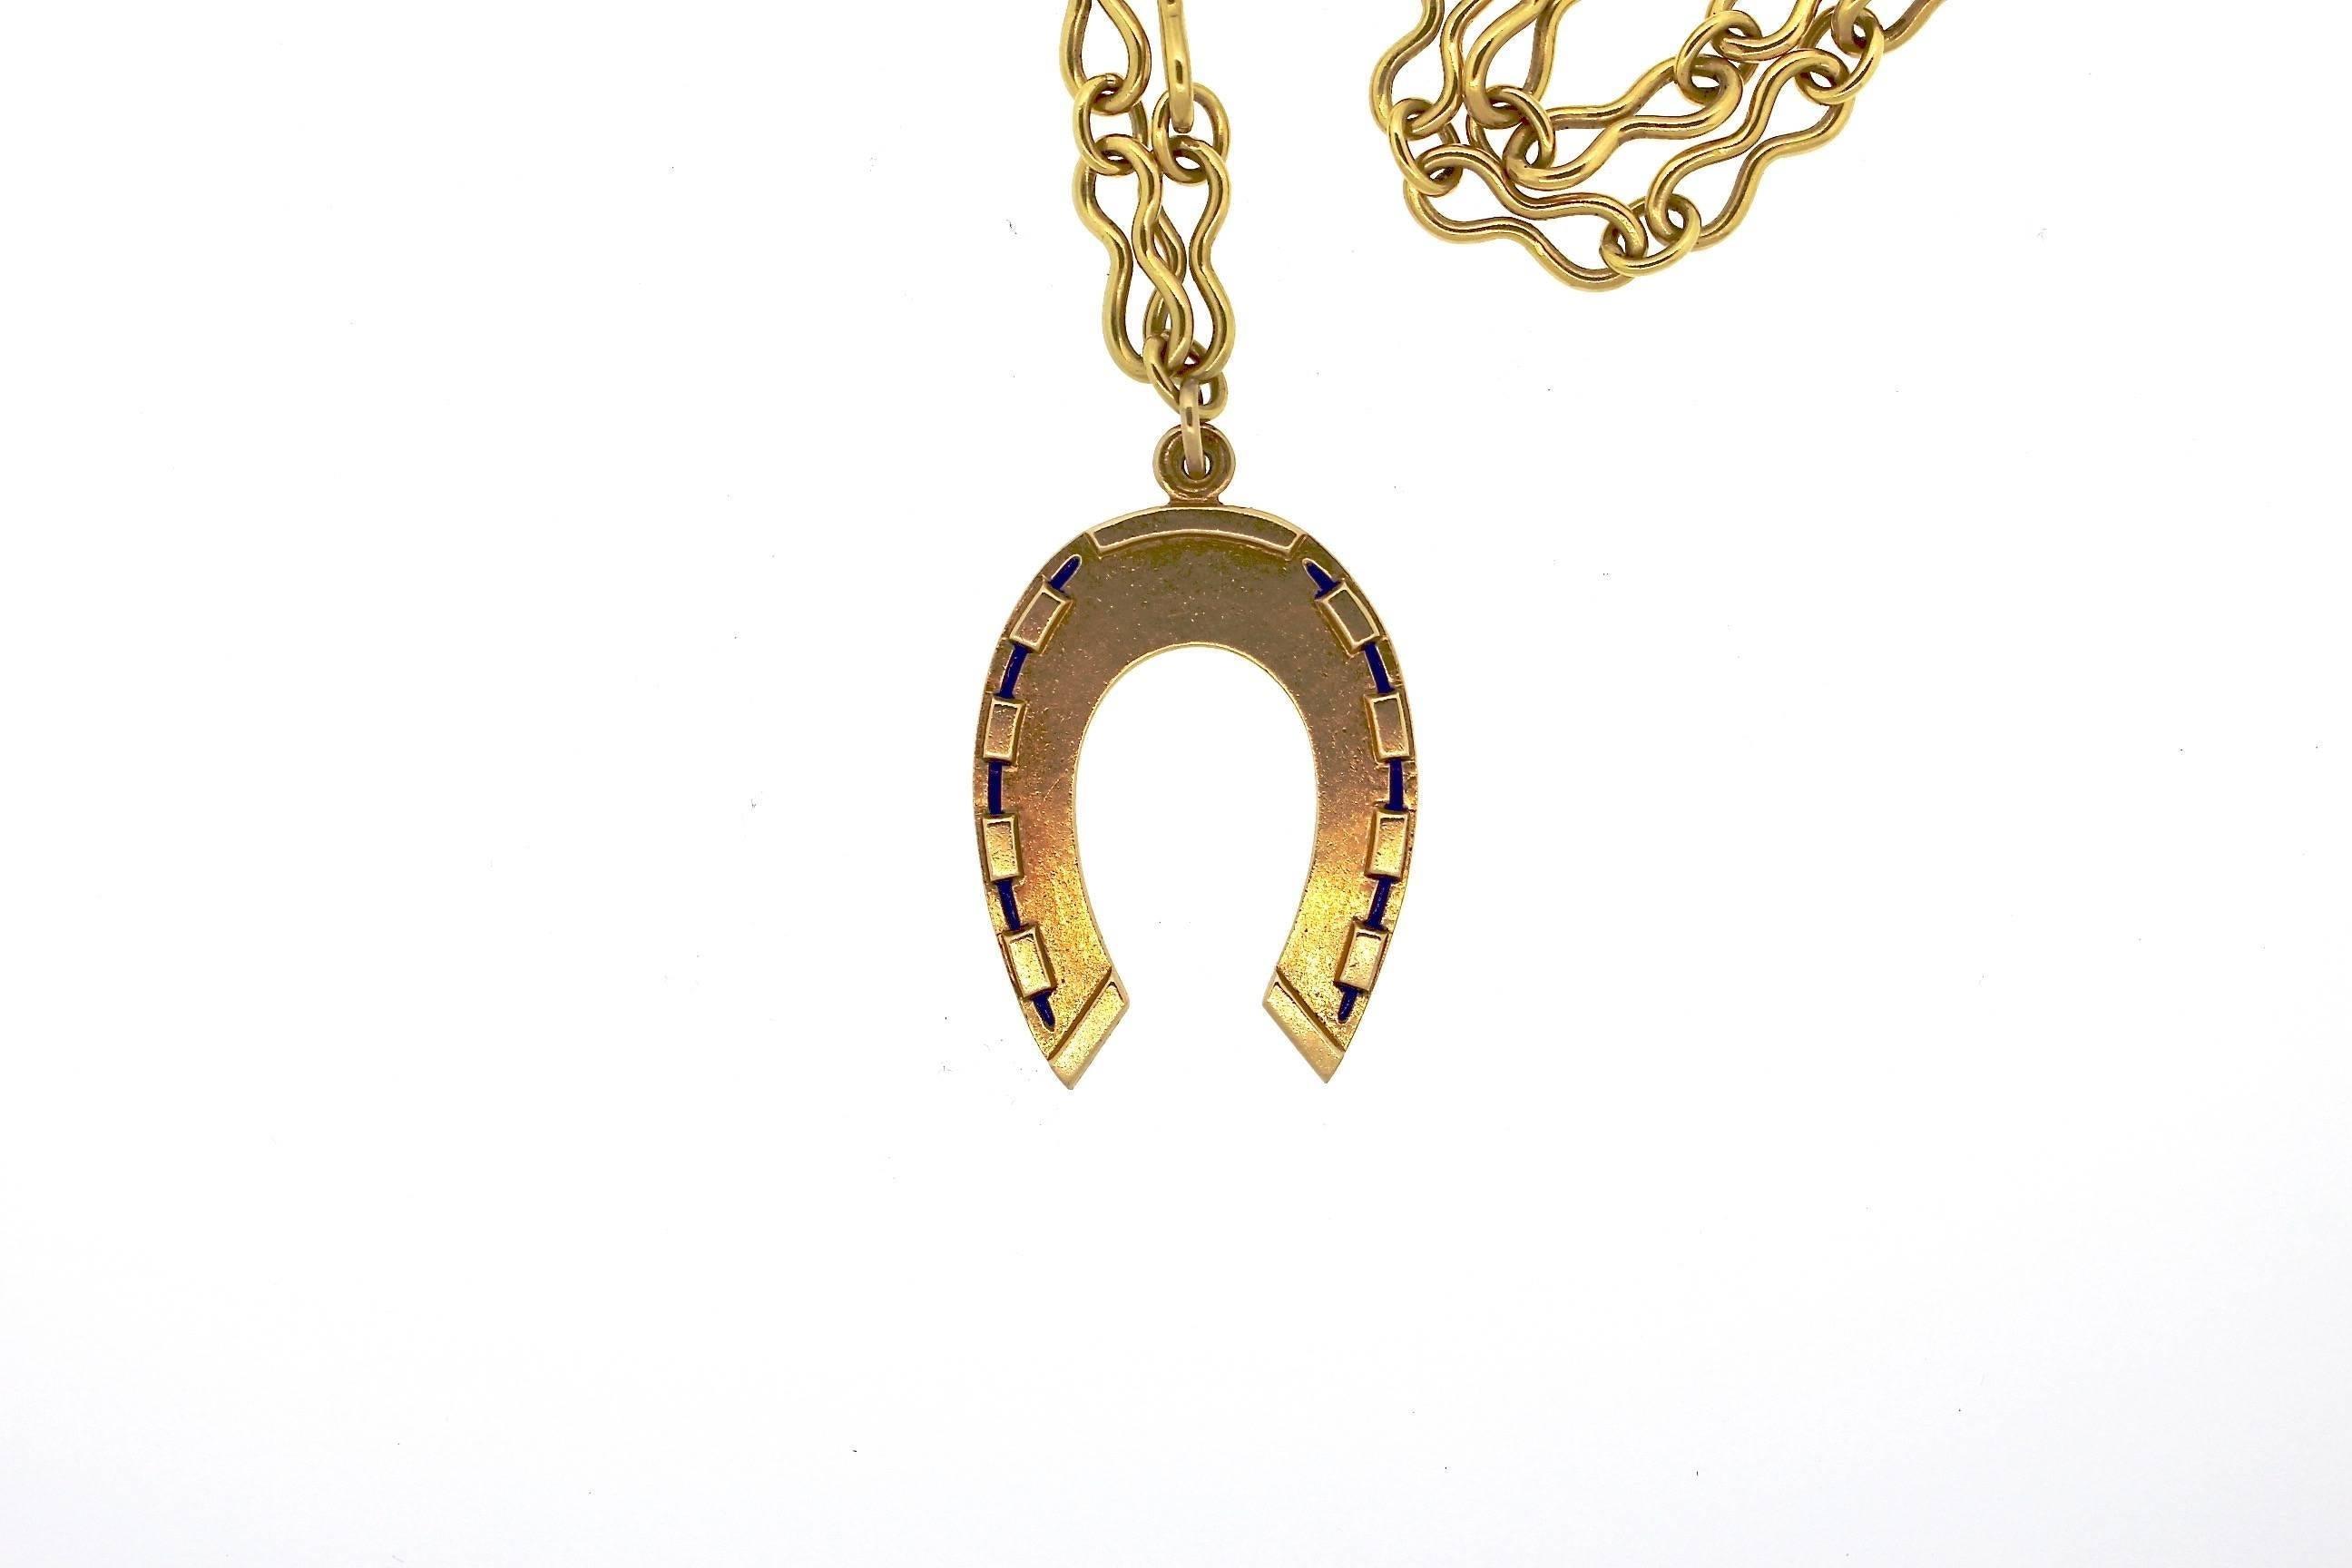 Simple, and easy to wear.  This 14k gold vintage horseshoe pendant is suspended from an 18k gold 26 inch long 18k gold chain.  The chain has an interesting pinched oval link.  The horseshoe is accented by blue enamel around the perimeter of the